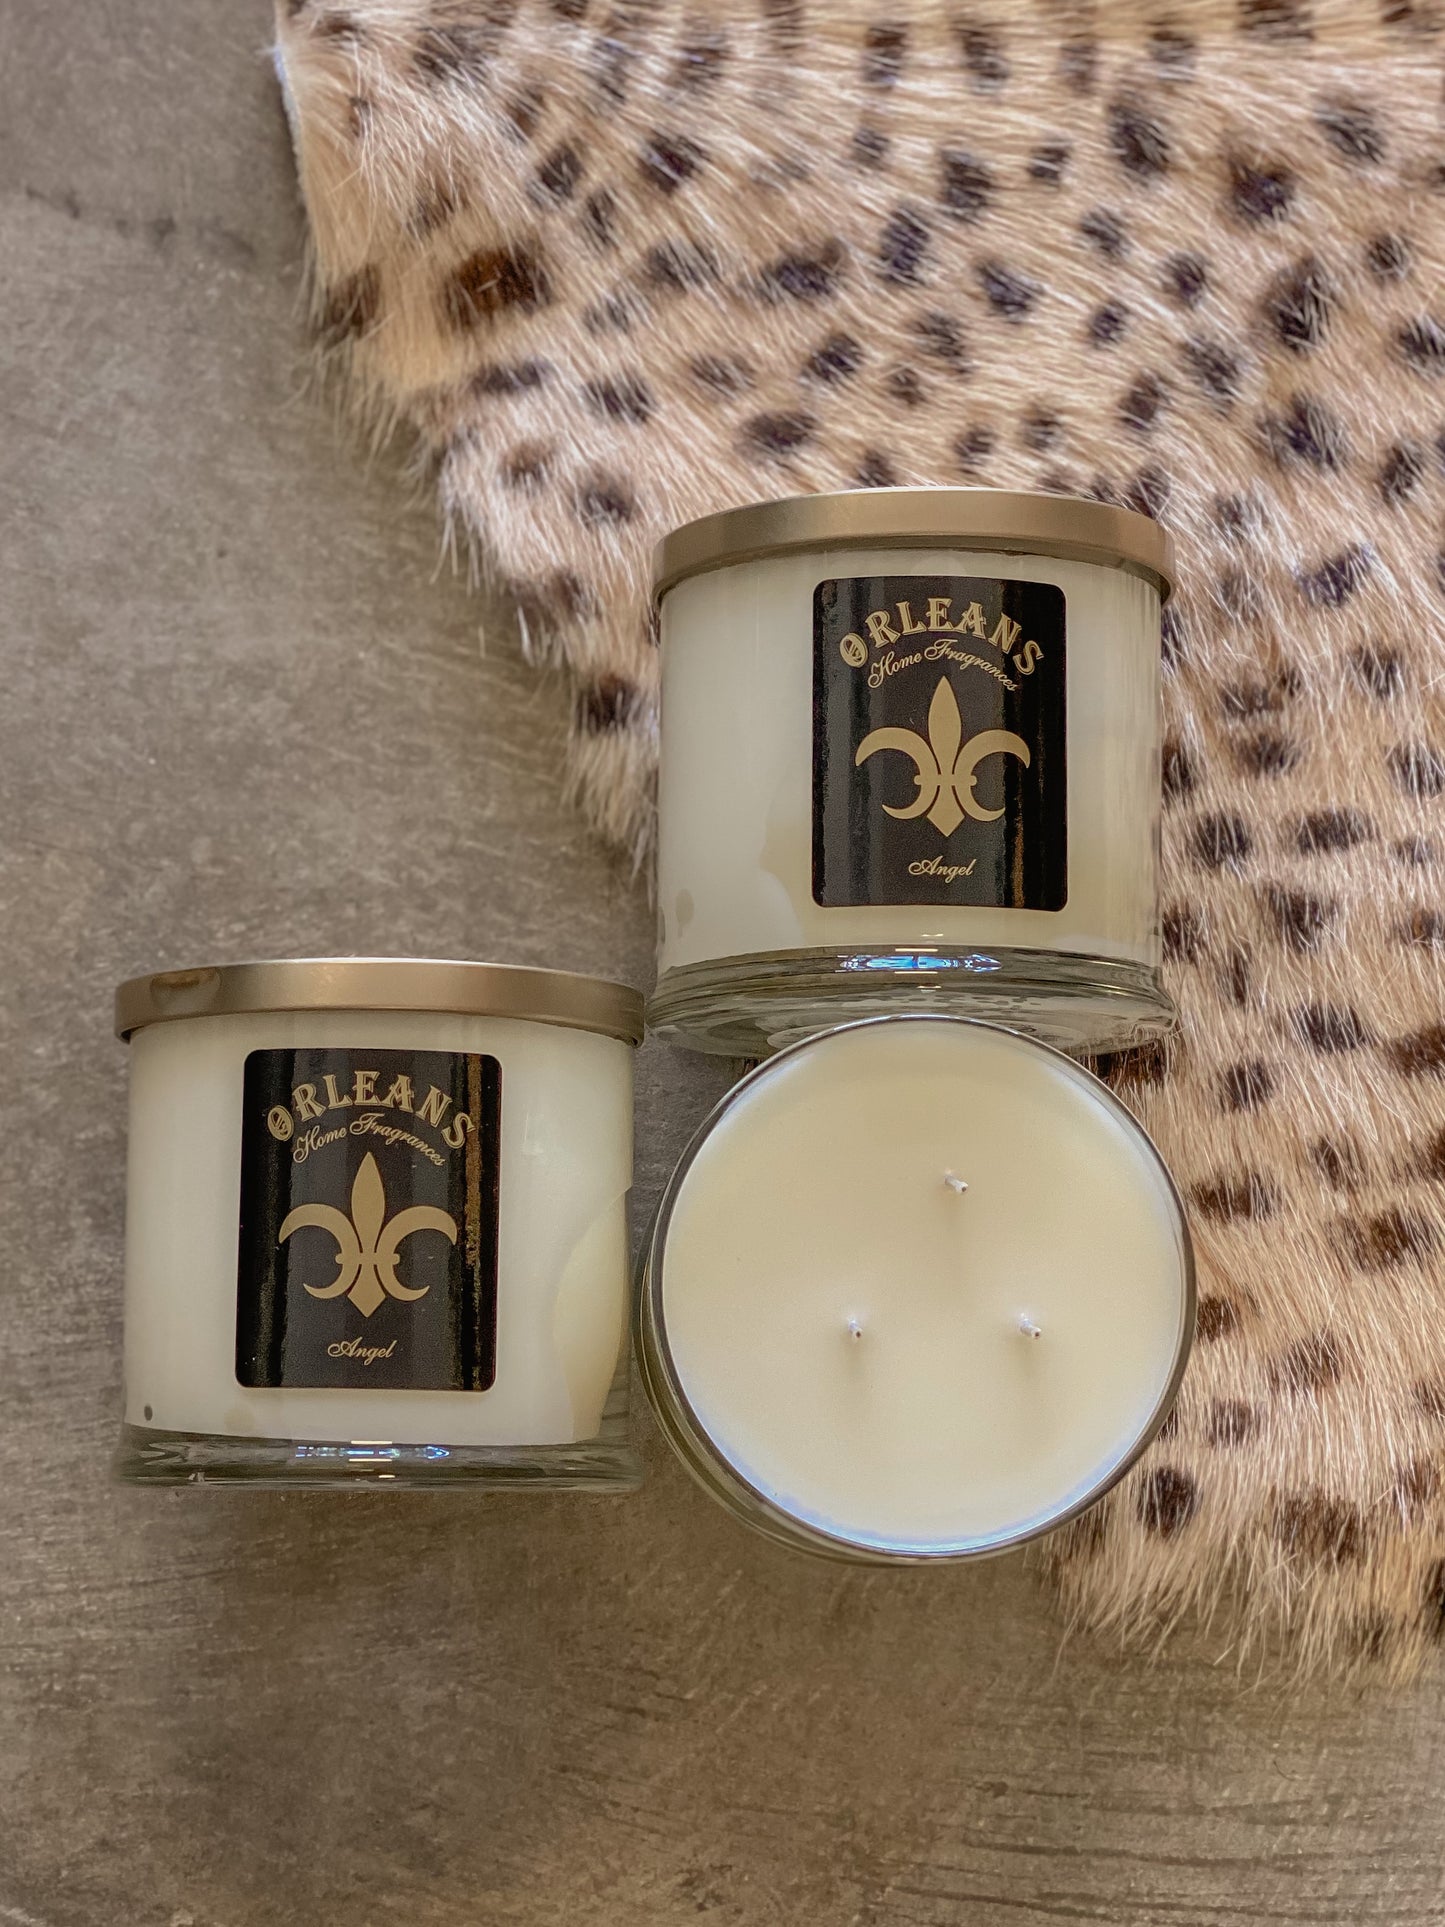 The Orleans Candle